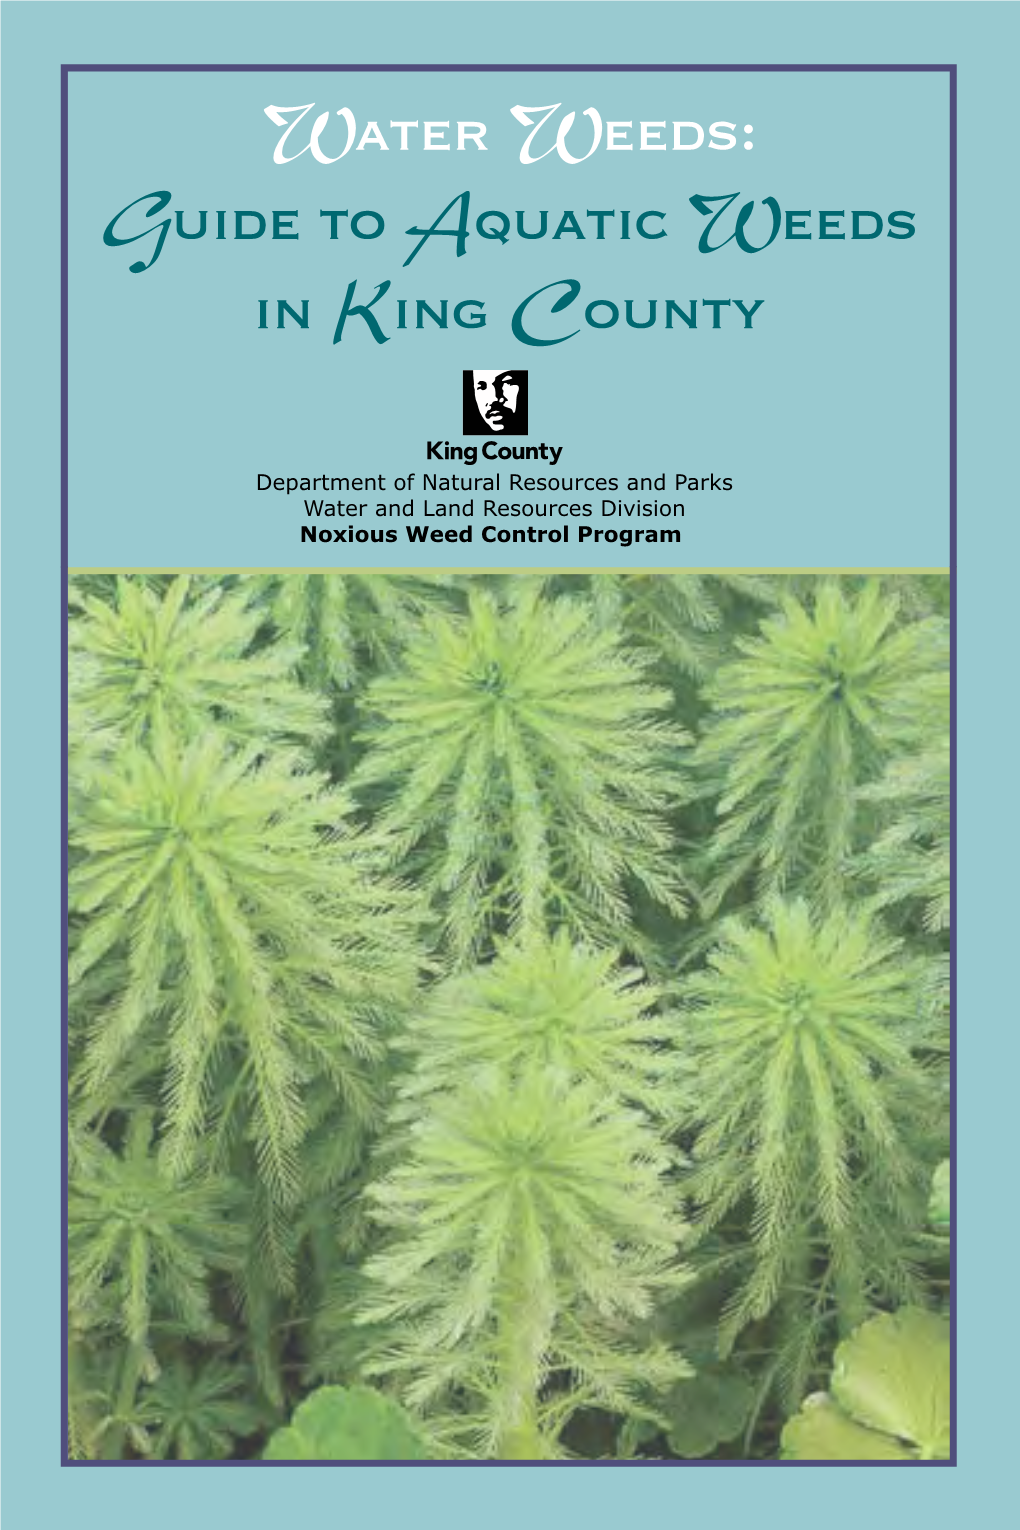 Guide to Aquatic Weeds in King County